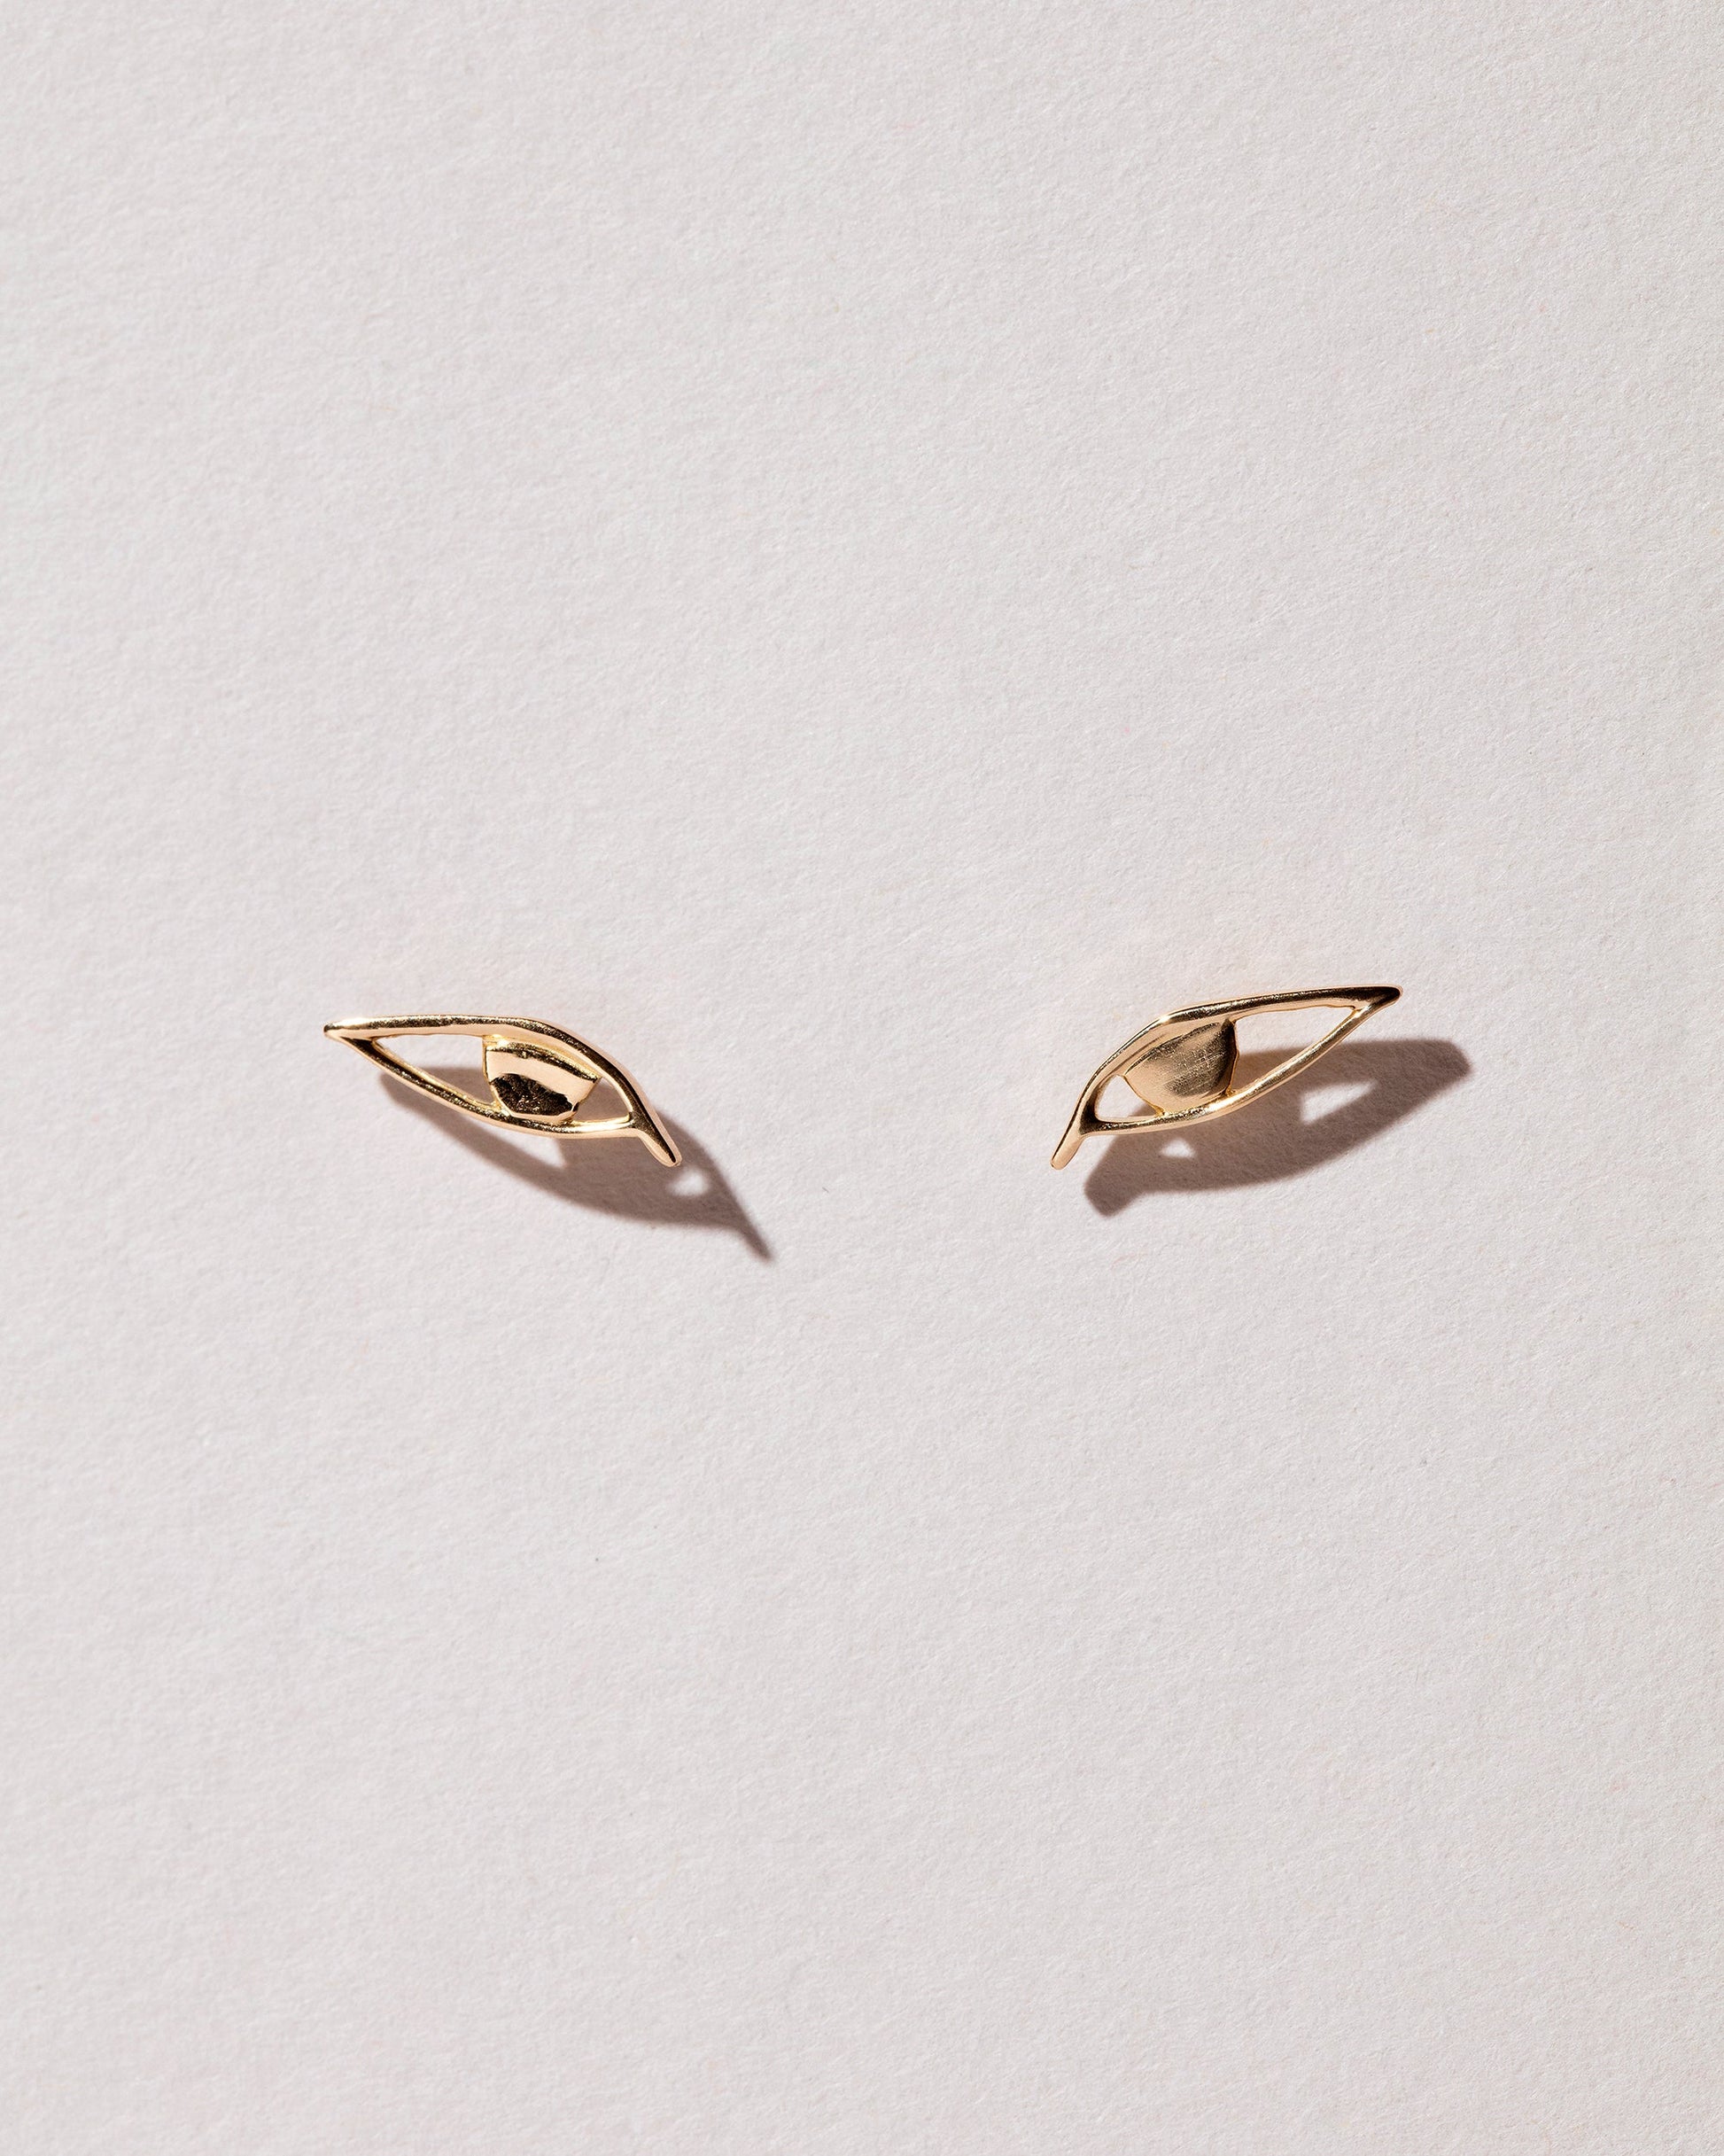 Left and Right Eye Stud Earrings on light color background.